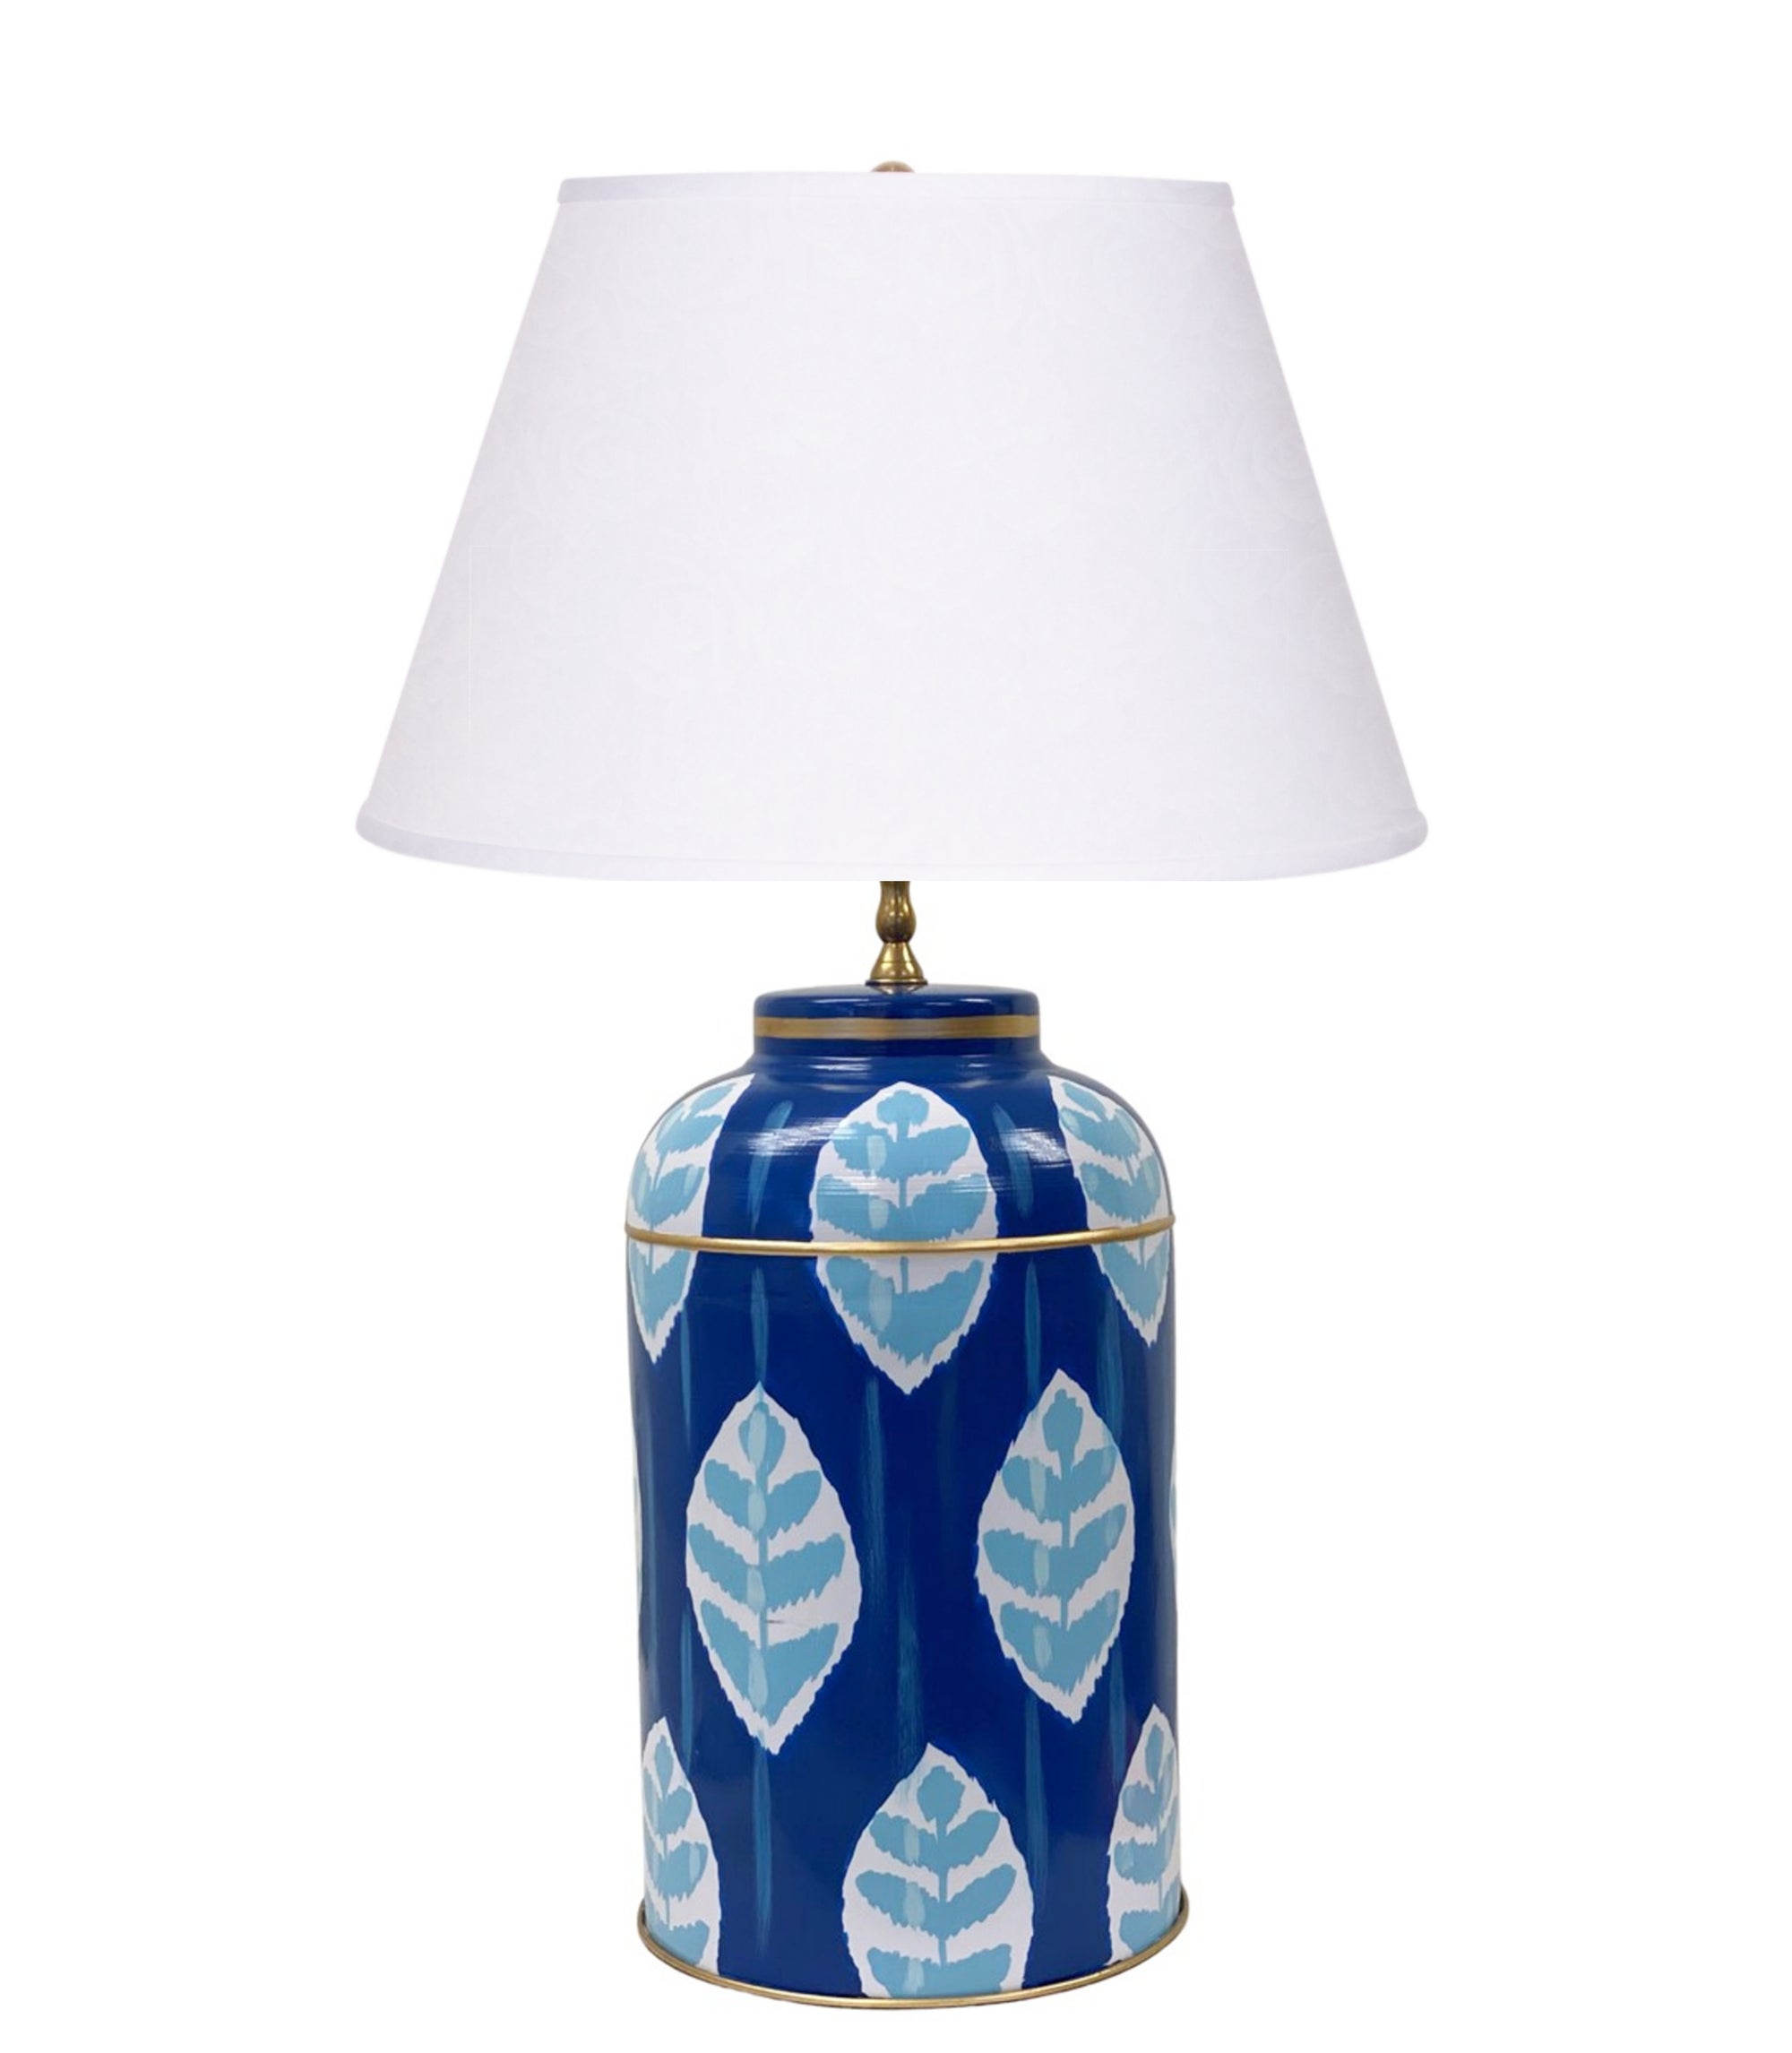 Dana Gibson Louvre Ikat Tea Caddy Lamp in Navy with White Linen Shade